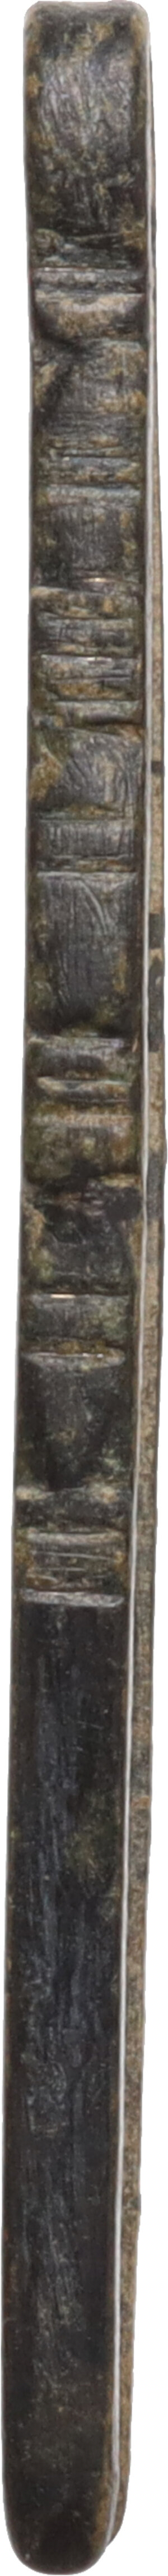 obverse: Bronze tweezers with geometric decorations along the legth of the arms.  Roman, 1st-3rd century AD  Length 63 mm. 4.03 g